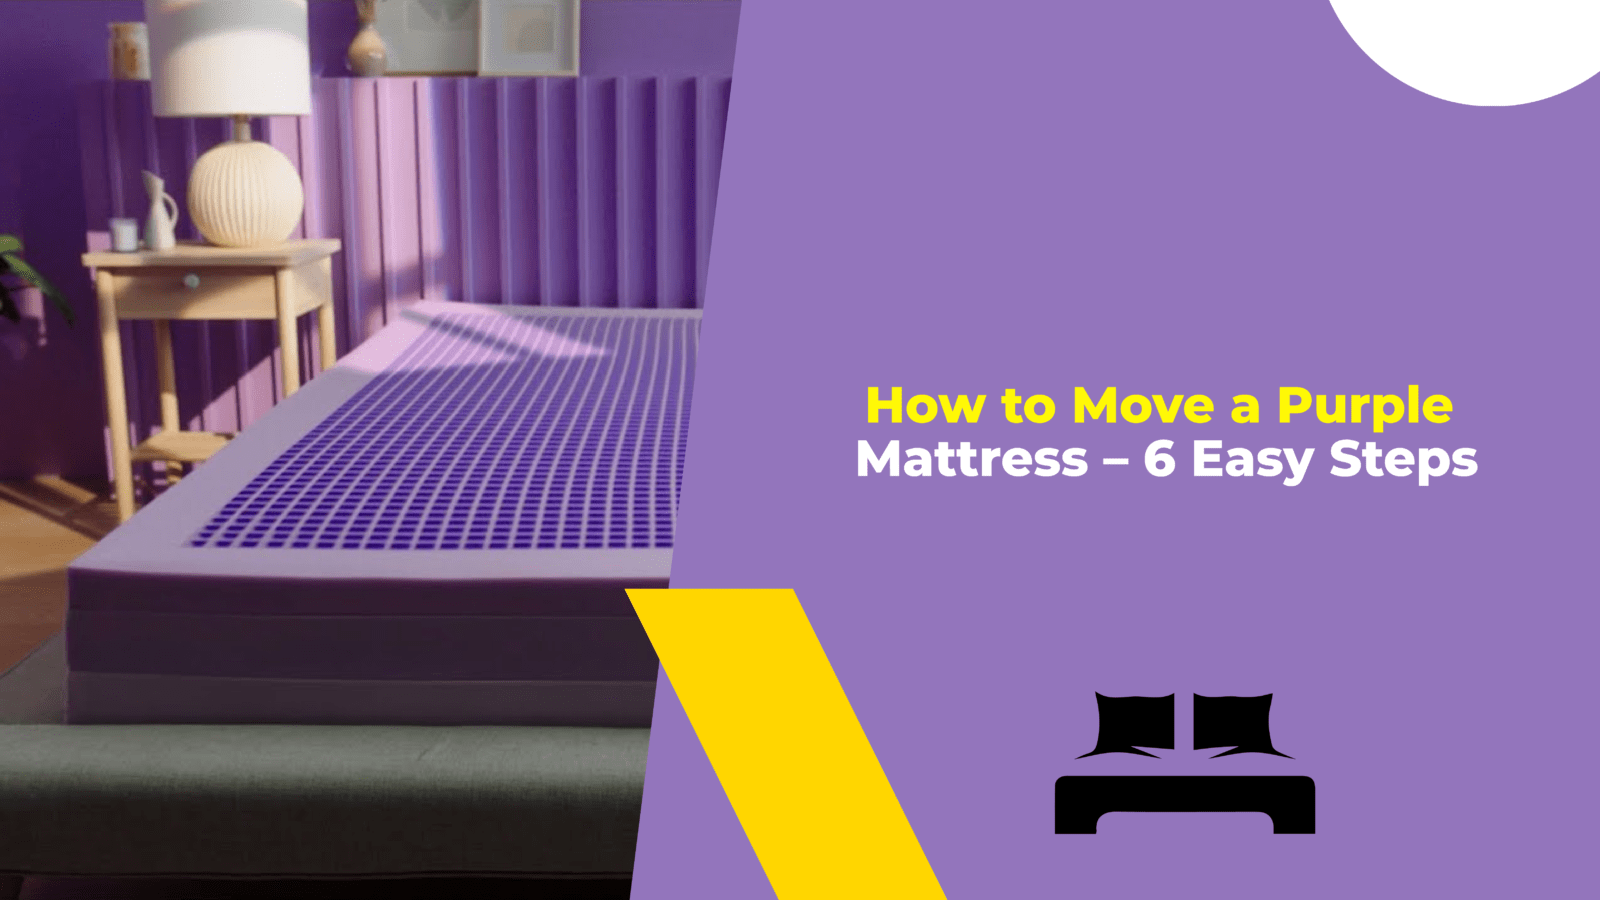 How to Move a Purple Mattress – 6 Easy Steps